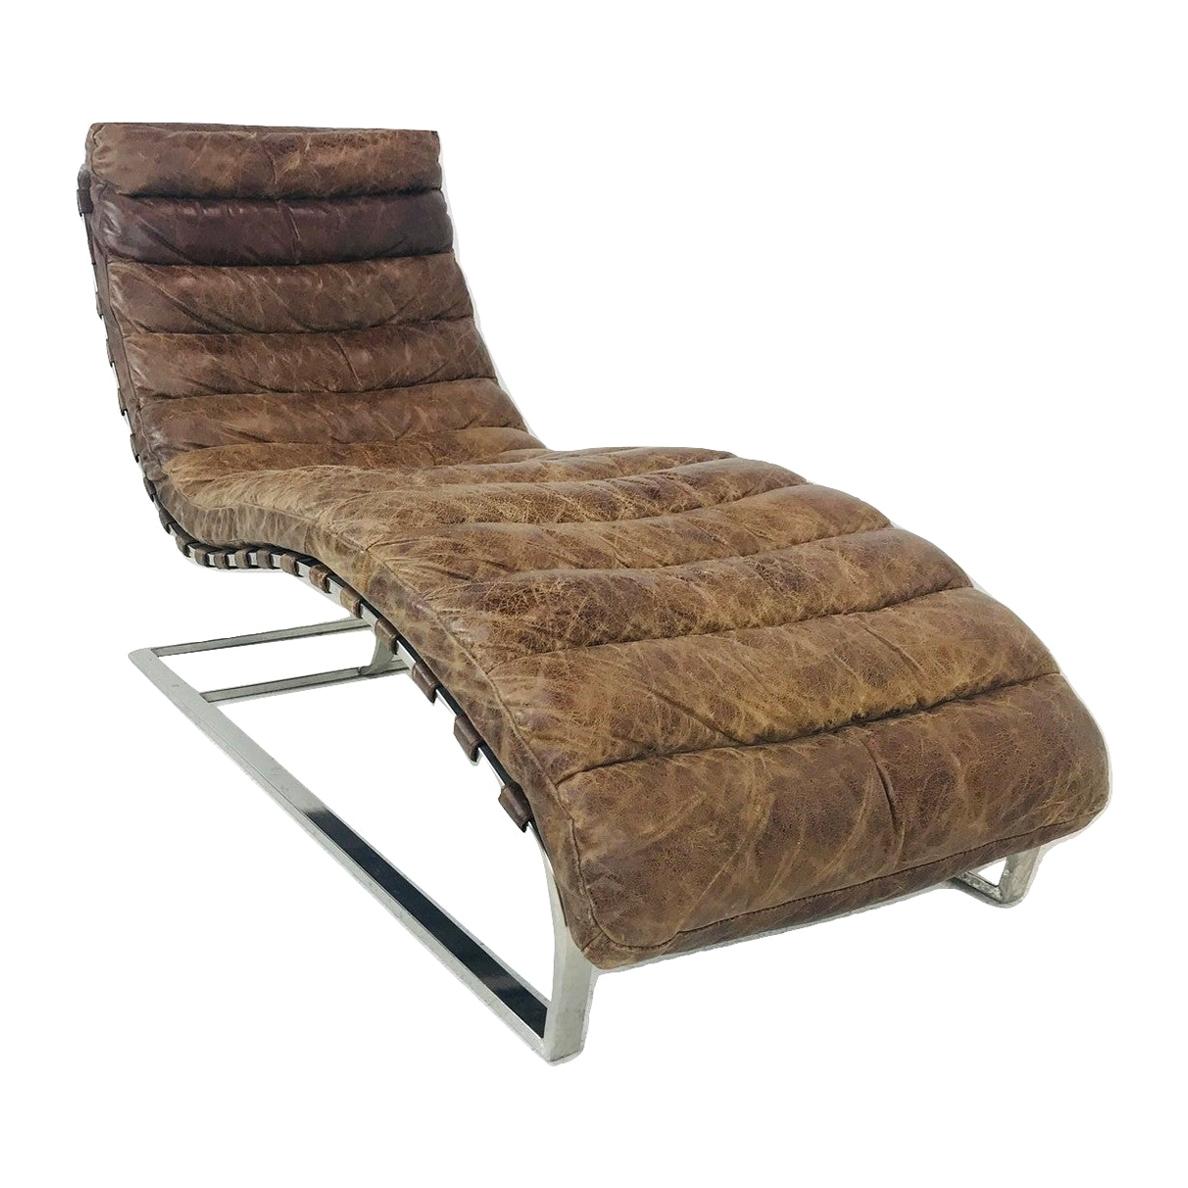 Oviedo Distressed Leather Chaise Lounge 